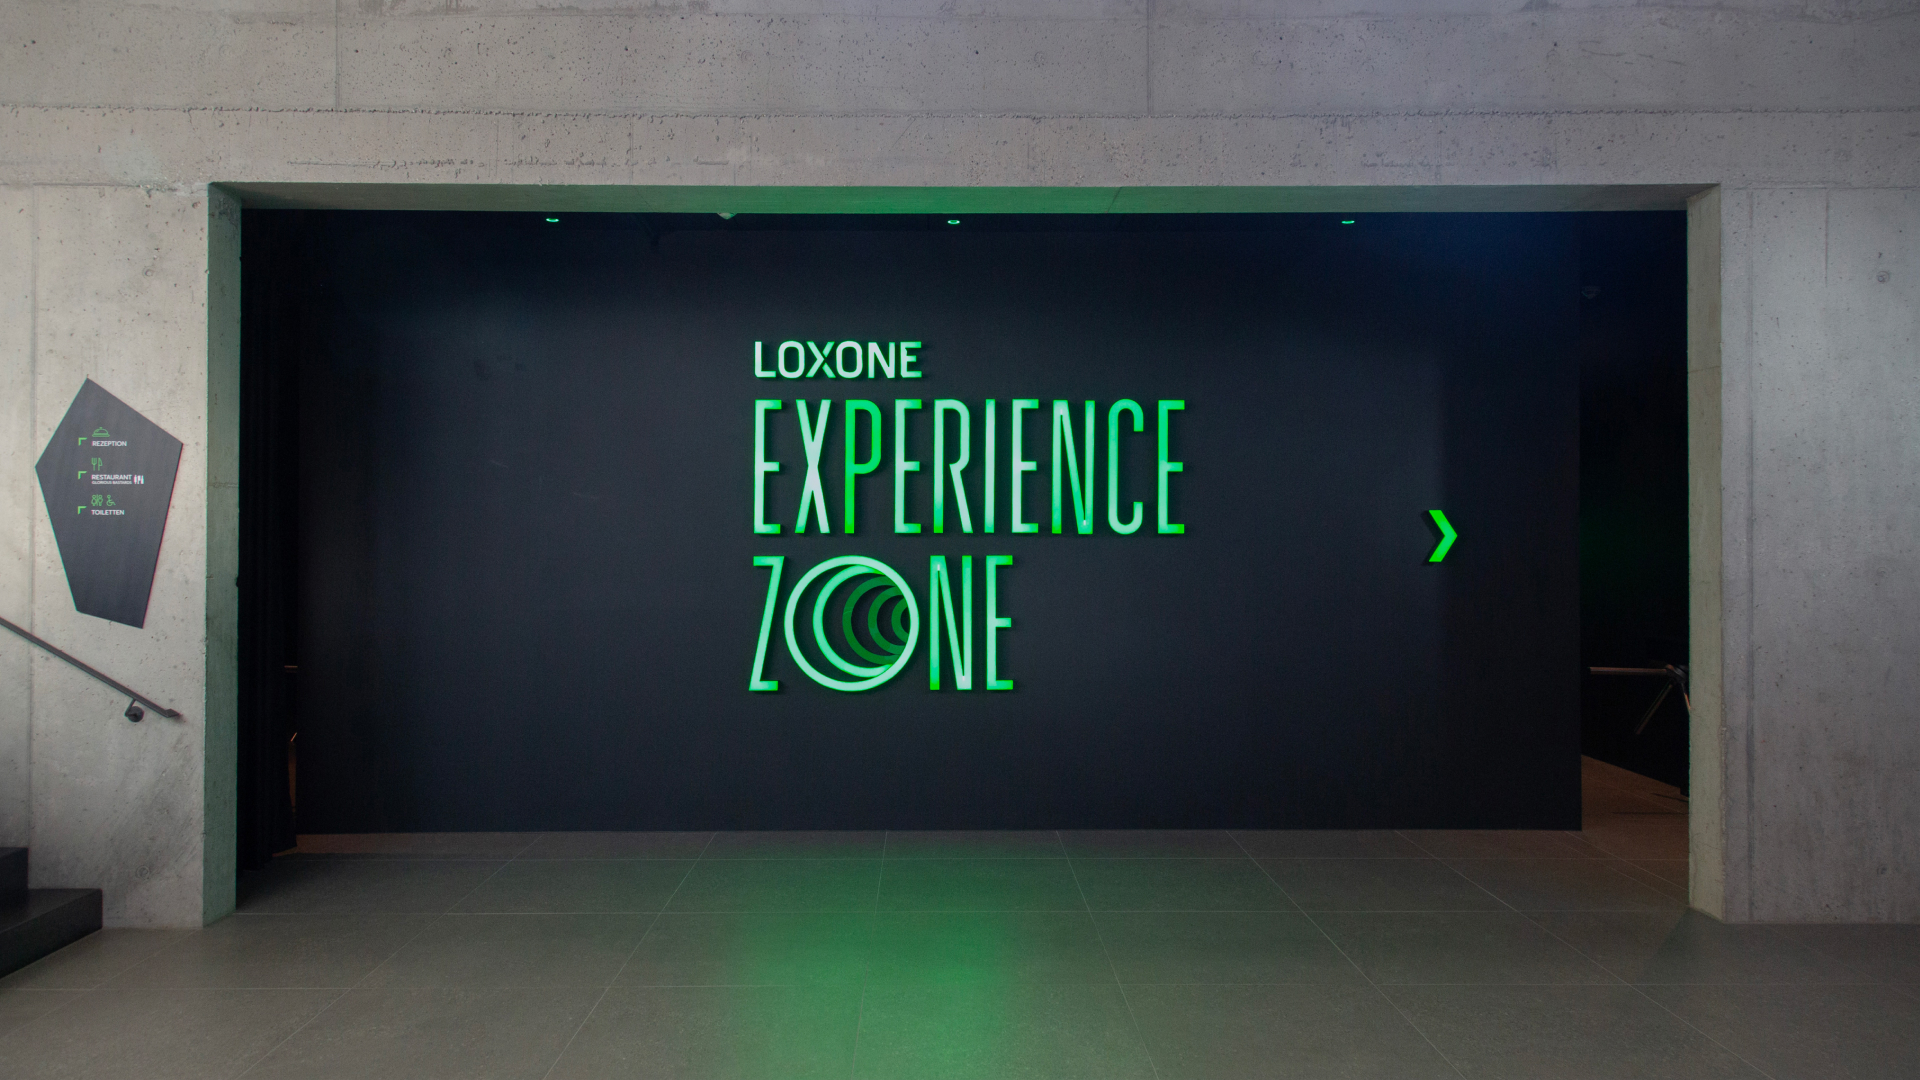 The Experience Zone is an exhibition dedicated to the world of building automation